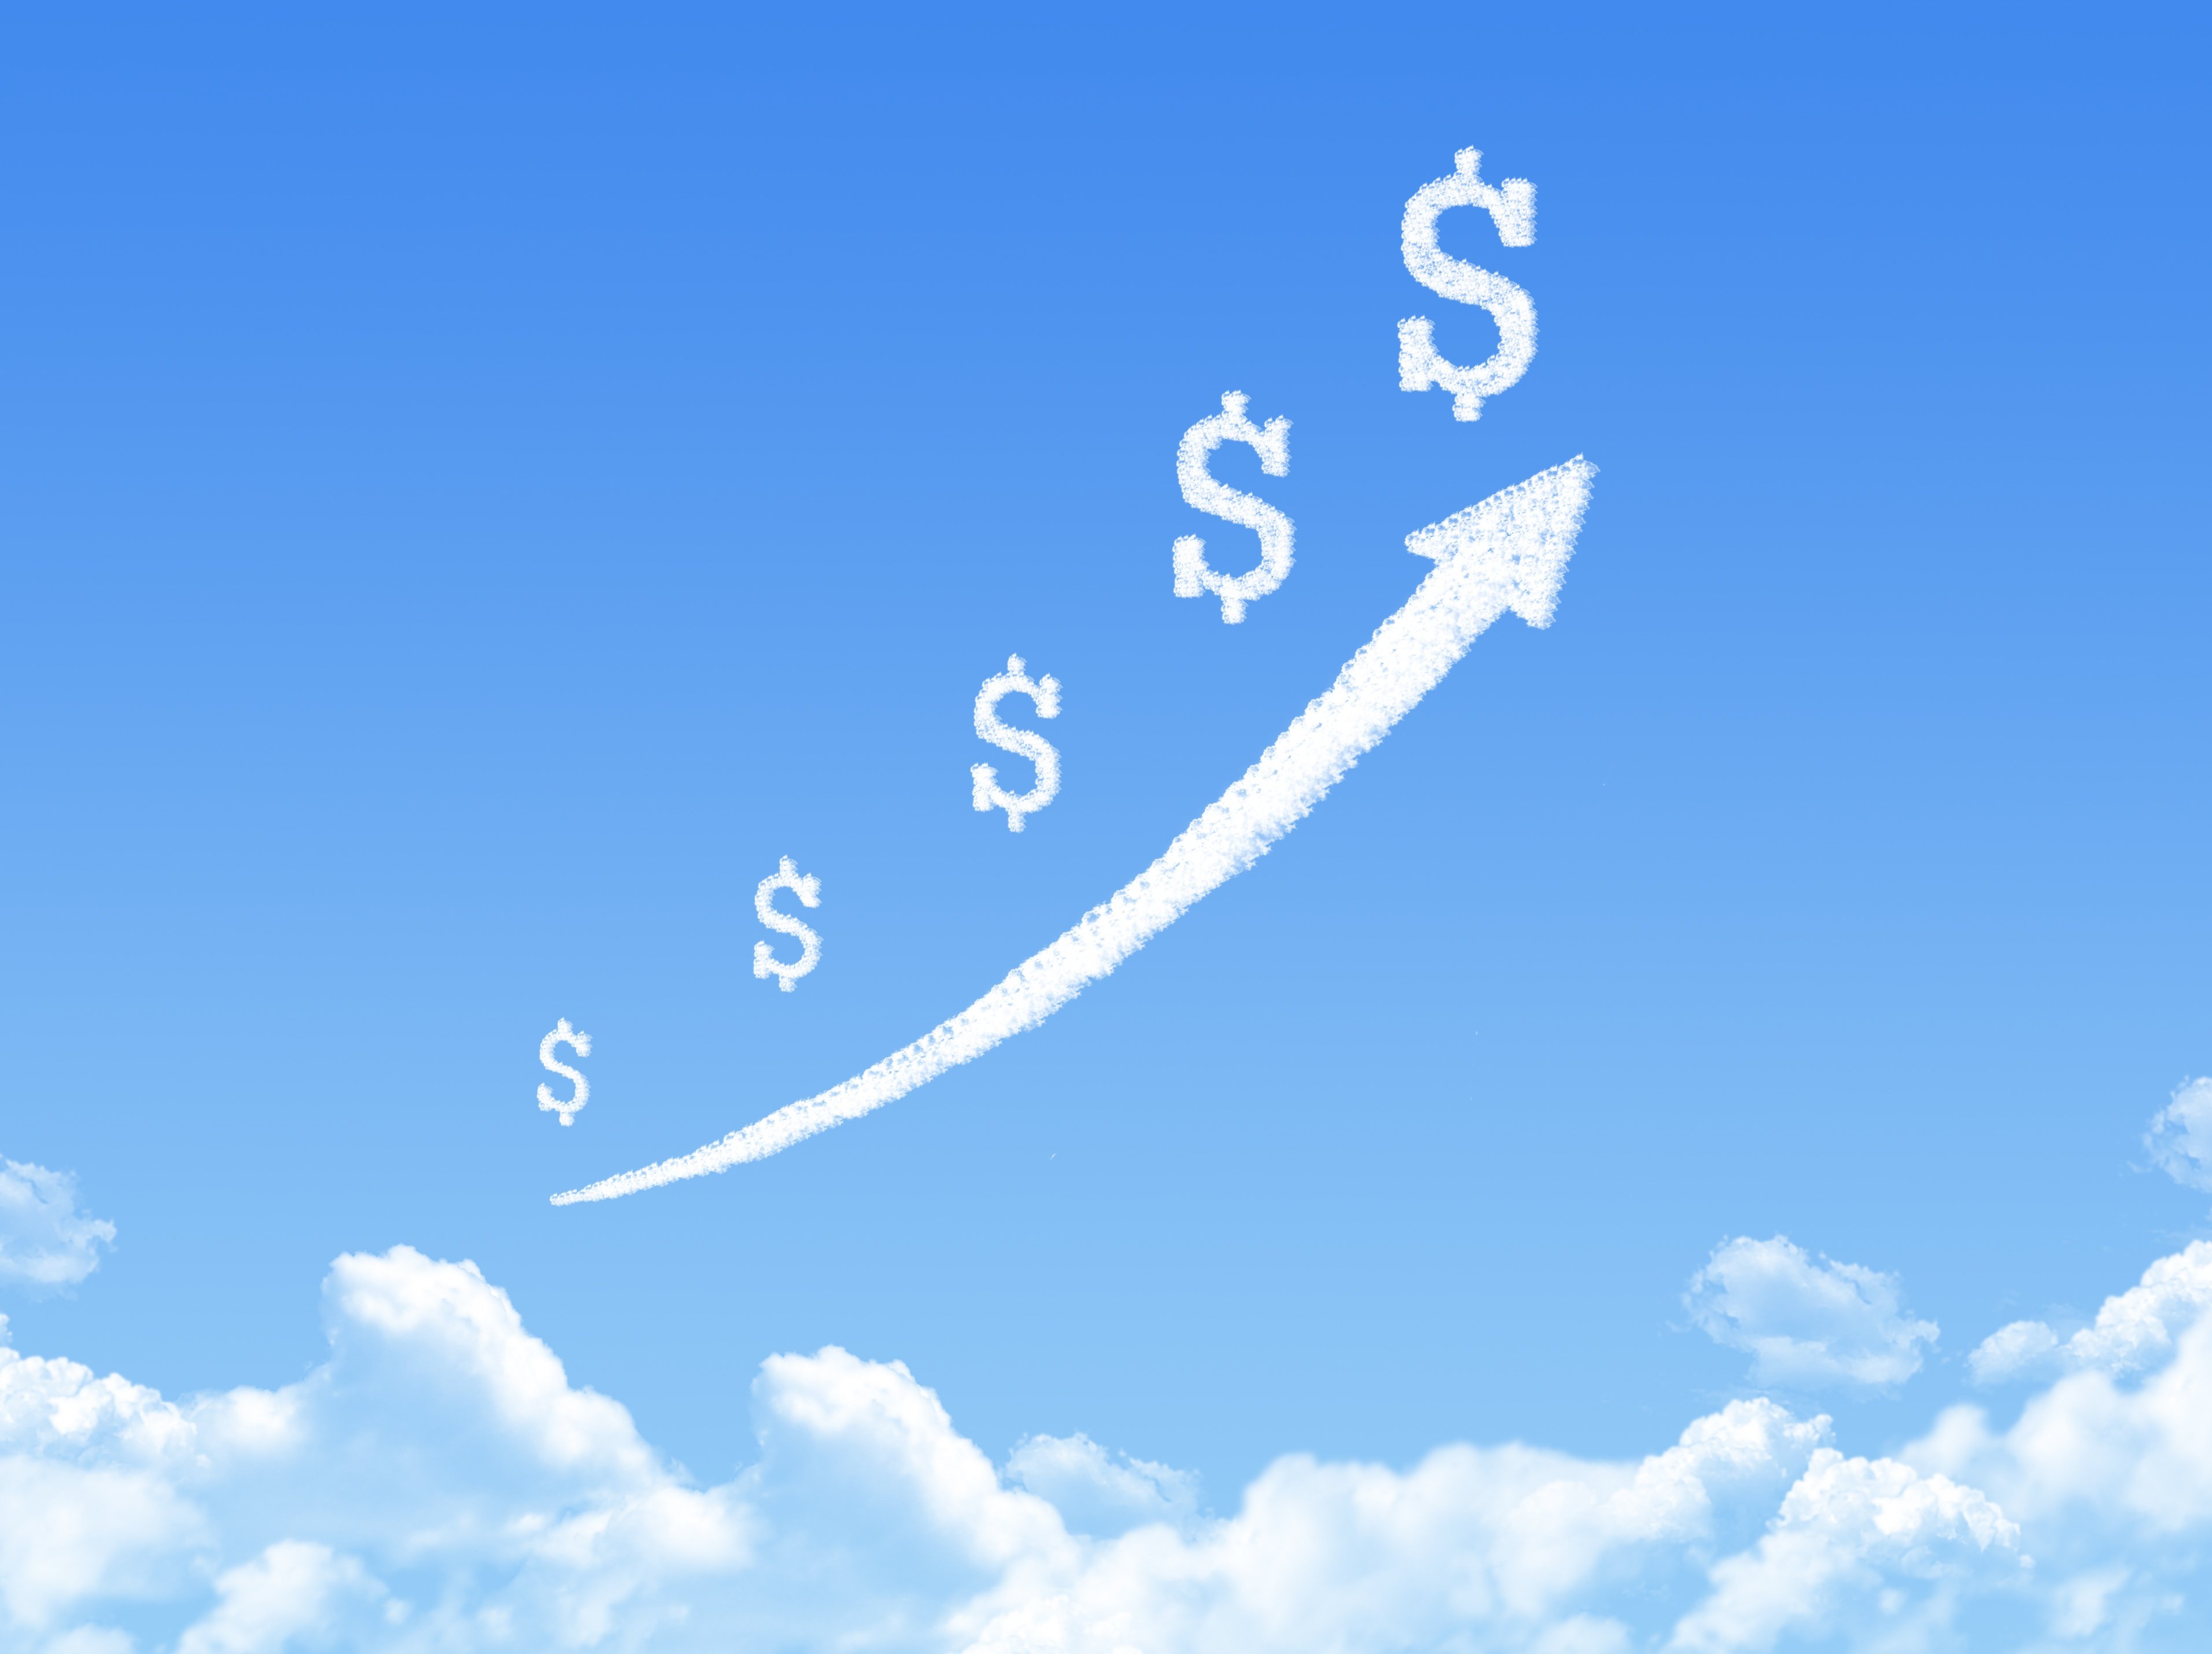 The Benefits of Acumatica: Cloud-Based Accounting Software